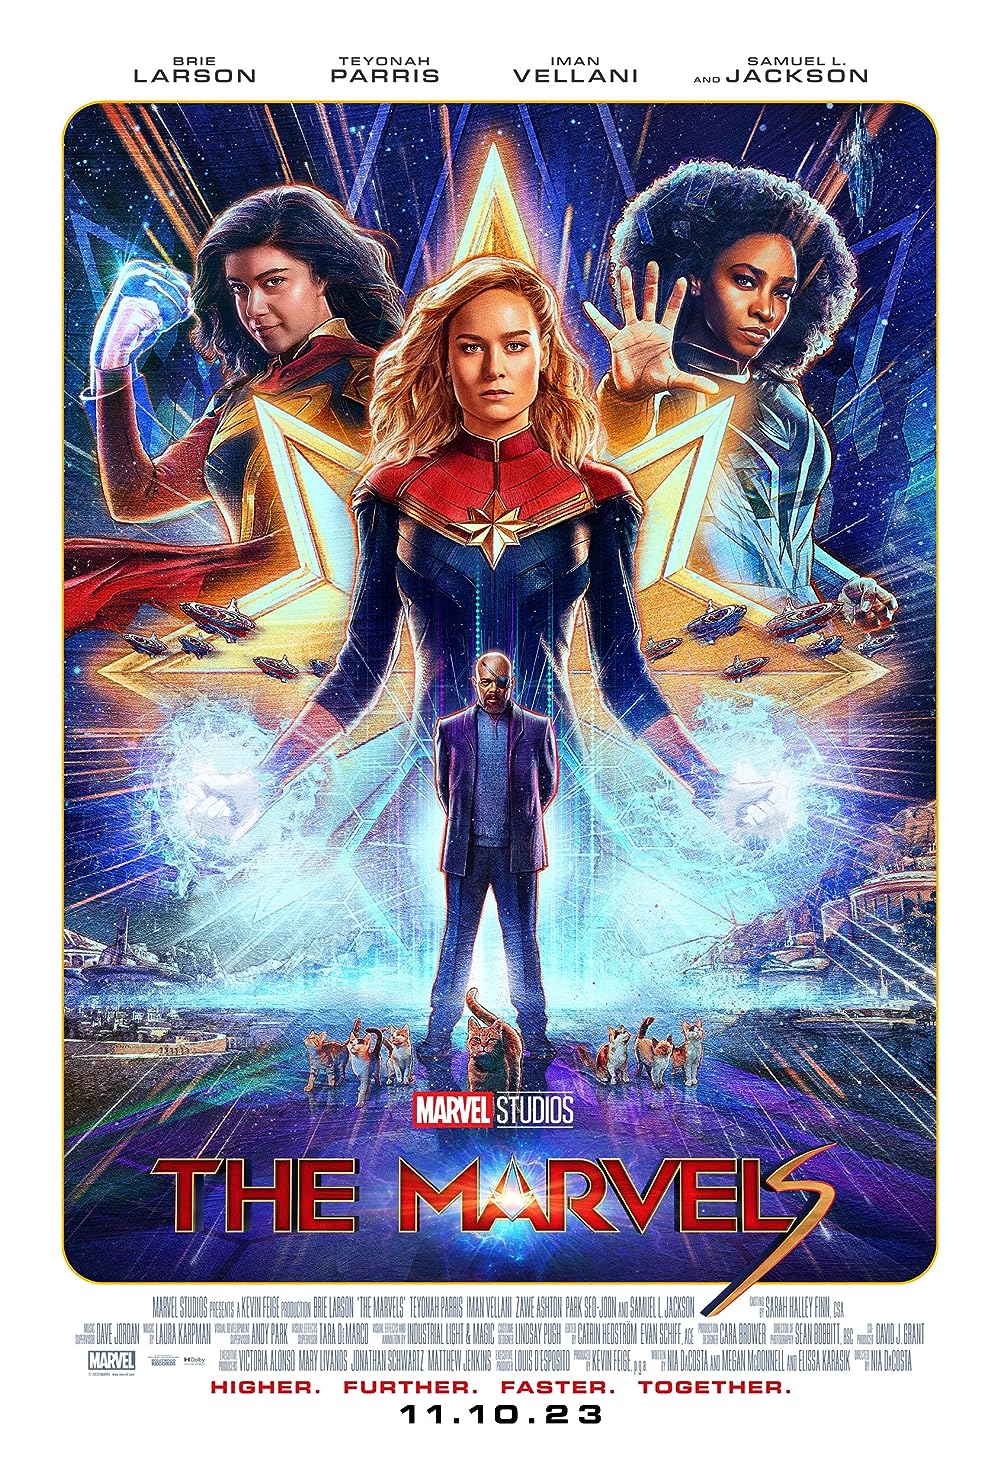 The Marvels (February 9) - Disney+ HotstarExploring the aftermath of Carol Danvers's actions, 